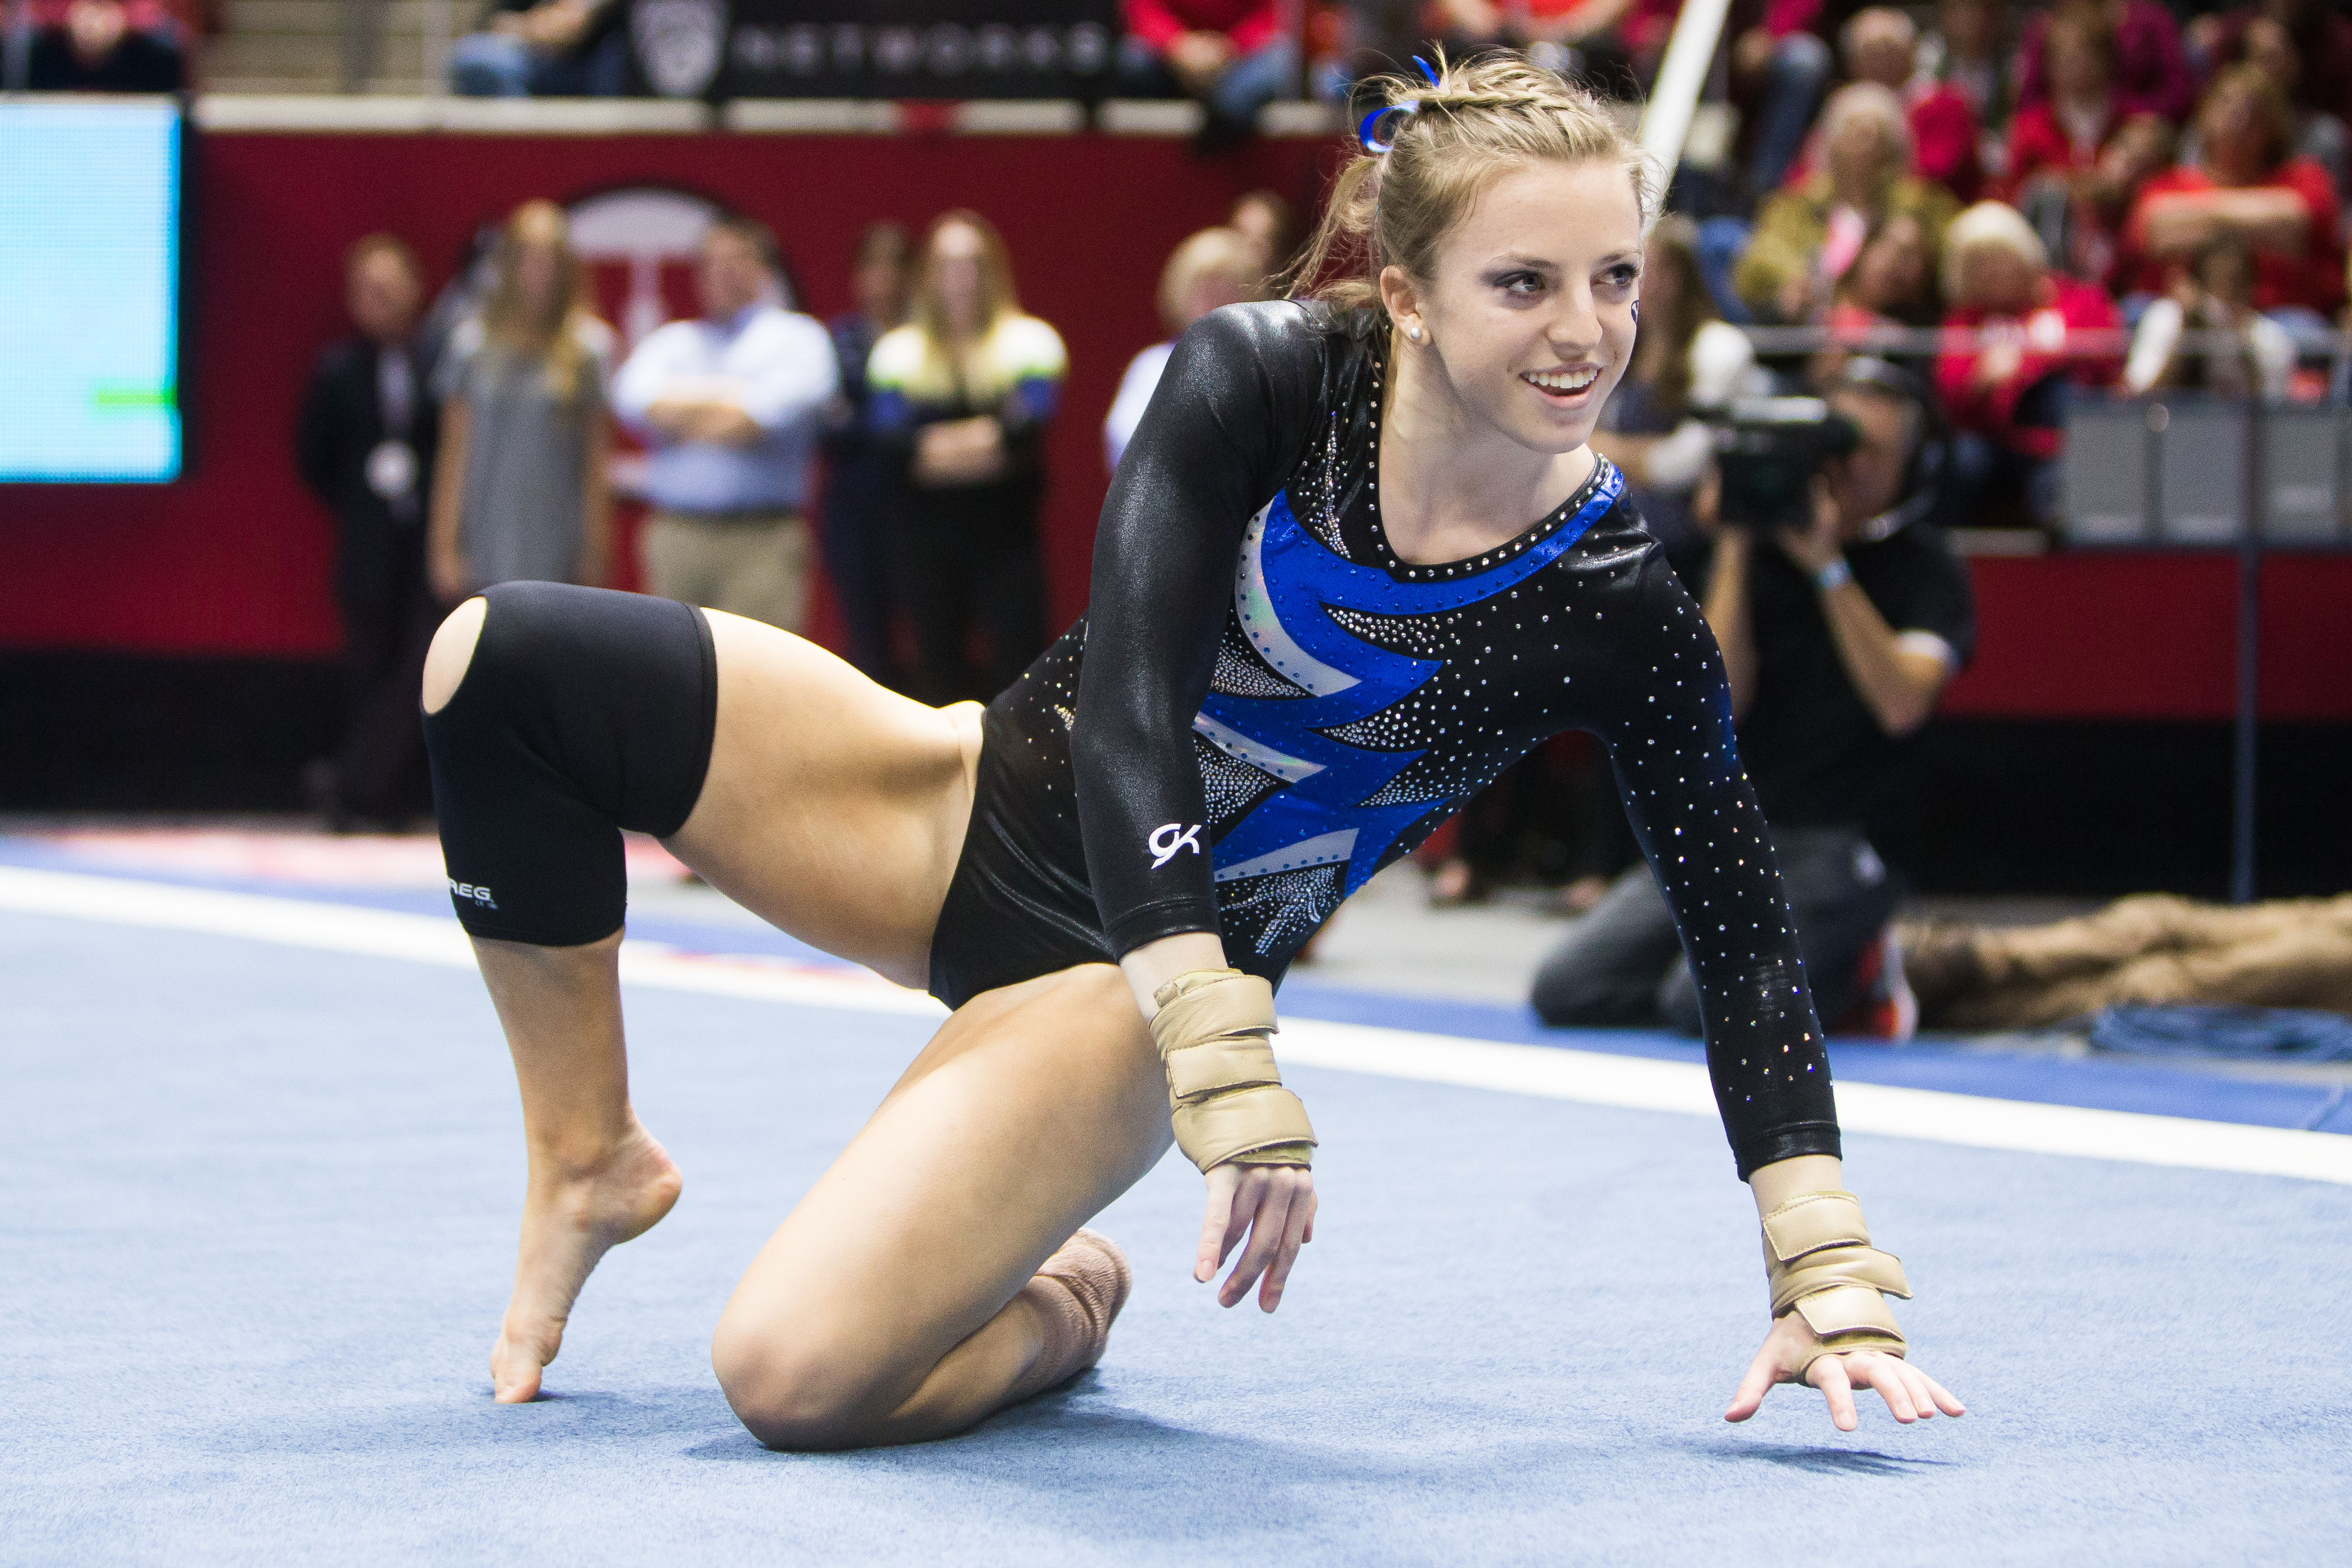 BYU gymnastics loses tight competition to Central Michigan - The Daily Universe